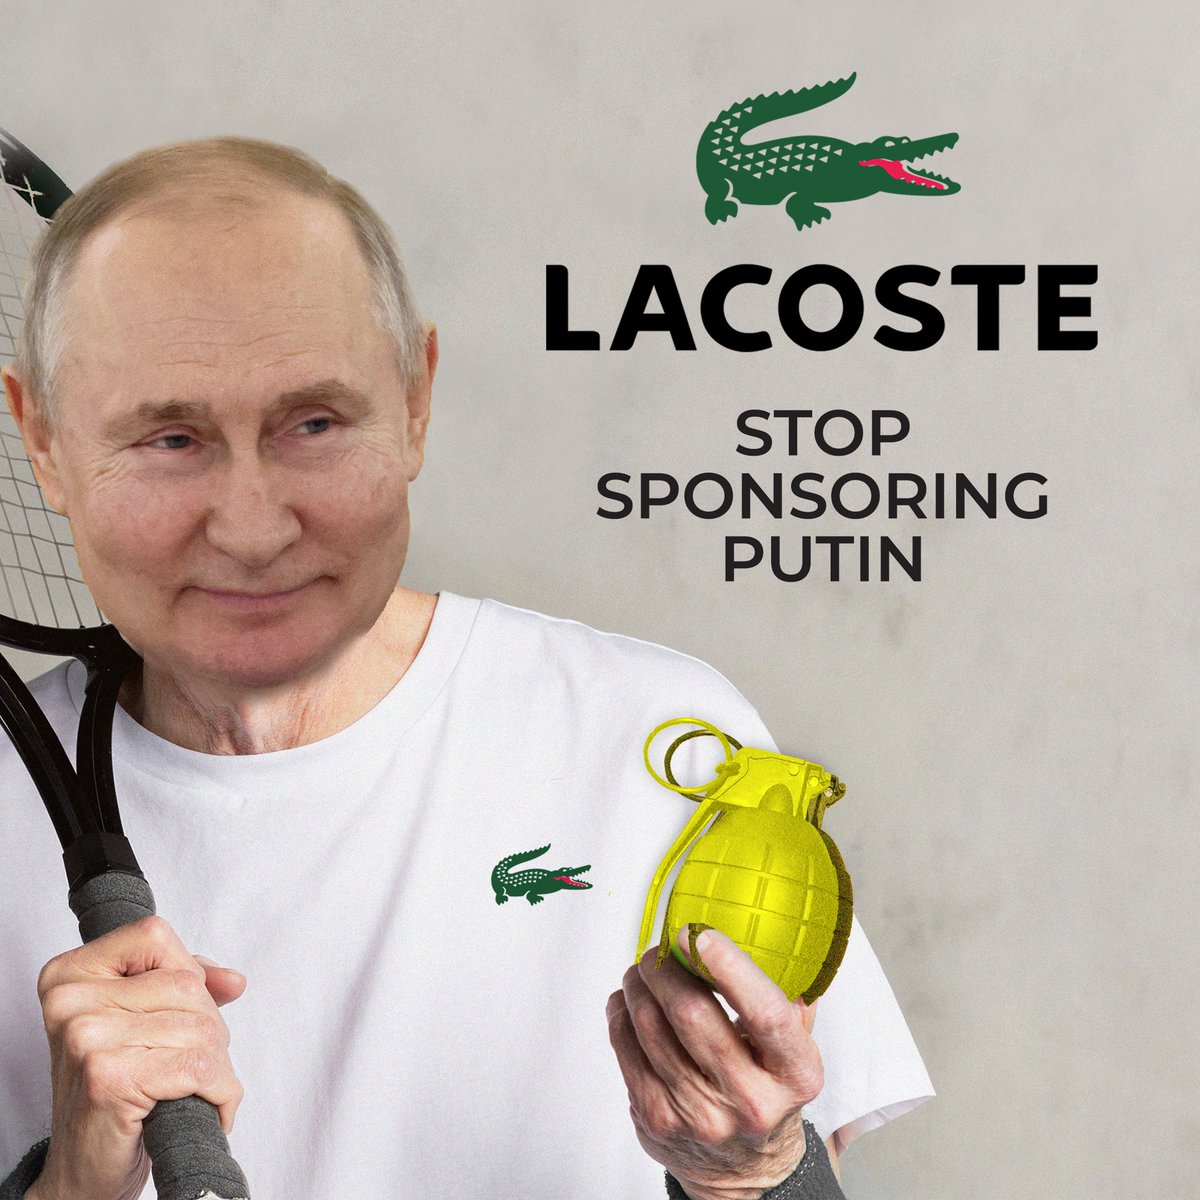 As @rolandgarros kicks off, we wanted to tell everyone that @Lacoste—one of the French Open's Premium Partners—has scores of stores still open in Moscow 'working as per standard regime'. Yes, we checked.  

Call on Lacoste to stop sponsoring Putin 🎾👀